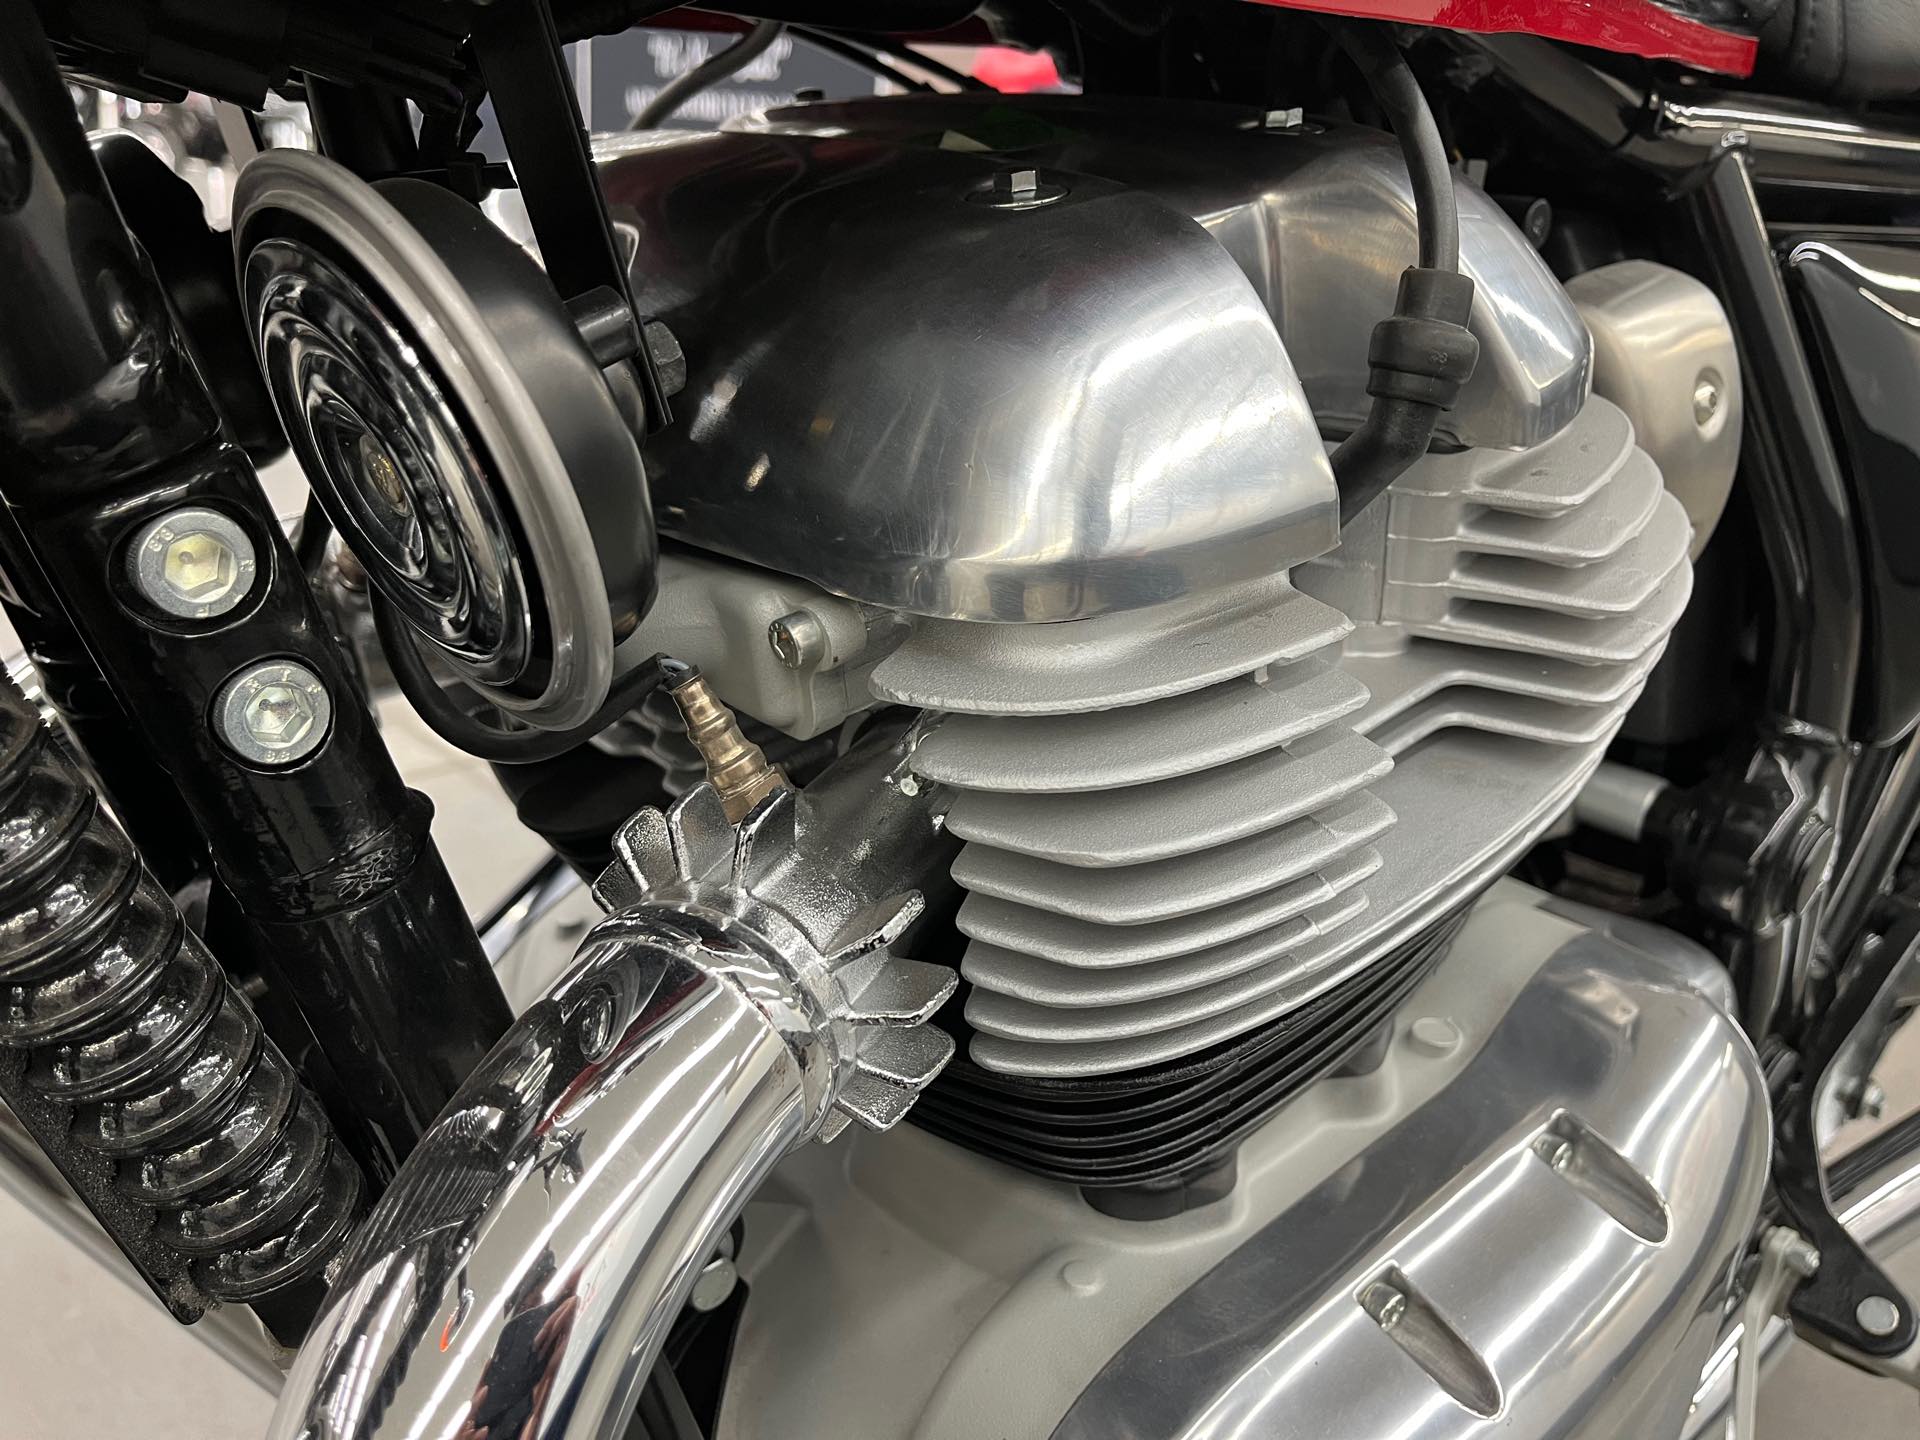 2023 Royal Enfield Twins INT650 at Aces Motorcycles - Denver